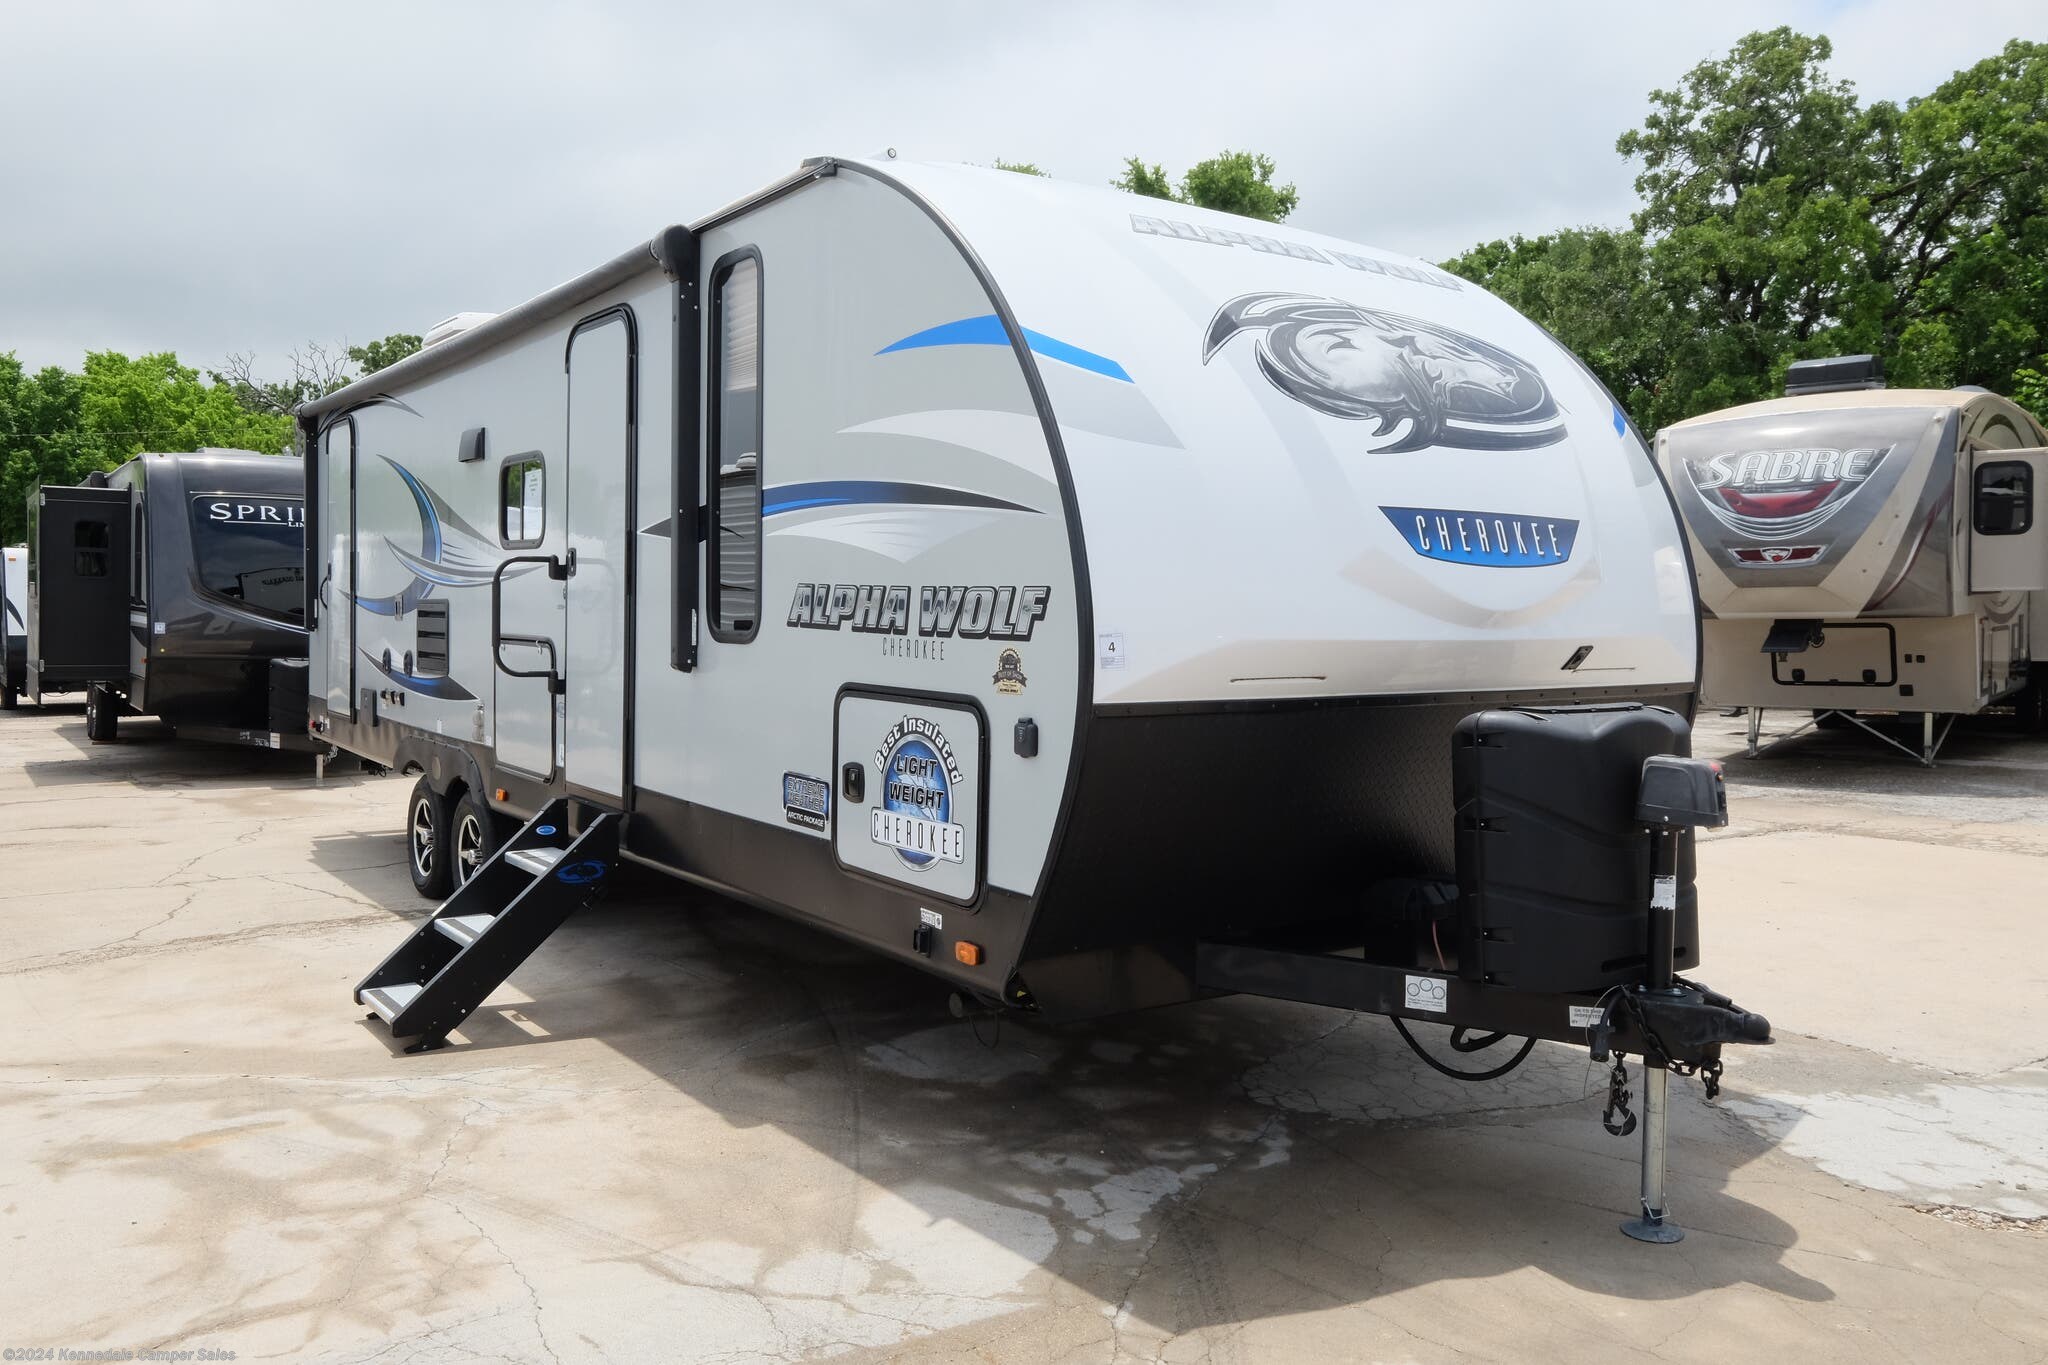 2019 Forest River Cherokee Alpha Wolf 26DBH-L RV for Sale in Kennedale, TX 76060 | 301361 2019 Forest River Alpha Wolf 26dbh L